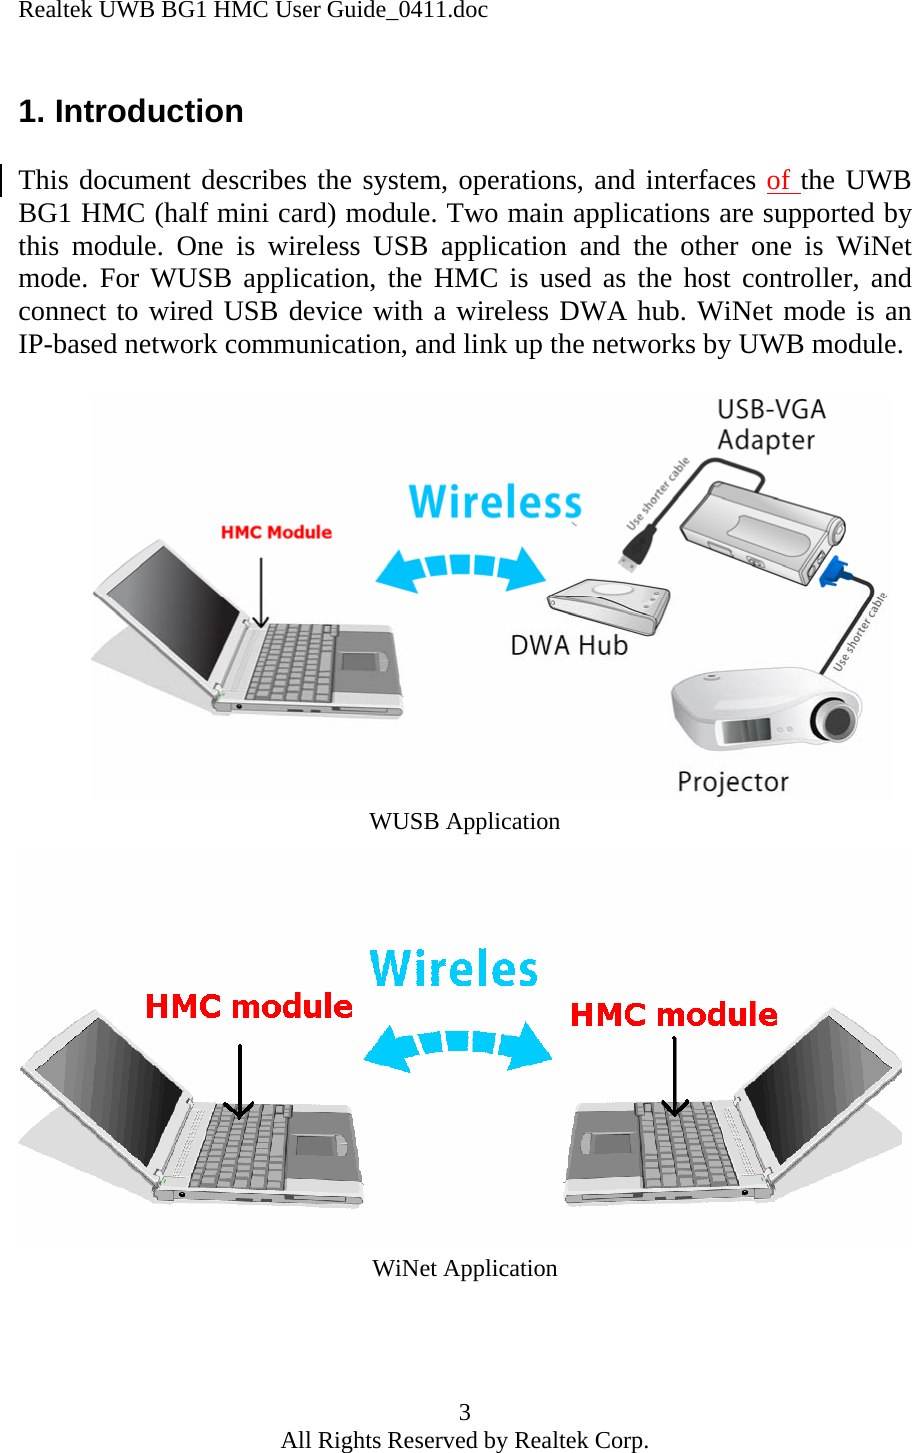 Realtek UWB BG1 HMC User Guide_0411.doc 3 All Rights Reserved by Realtek Corp. 1. Introduction  This document describes the system, operations, and interfaces of the UWB BG1 HMC (half mini card) module. Two main applications are supported by this module. One is wireless USB application and the other one is WiNet mode. For WUSB application, the HMC is used as the host controller, and connect to wired USB device with a wireless DWA hub. WiNet mode is an IP-based network communication, and link up the networks by UWB module.                 WUSB Application WiNet Application    